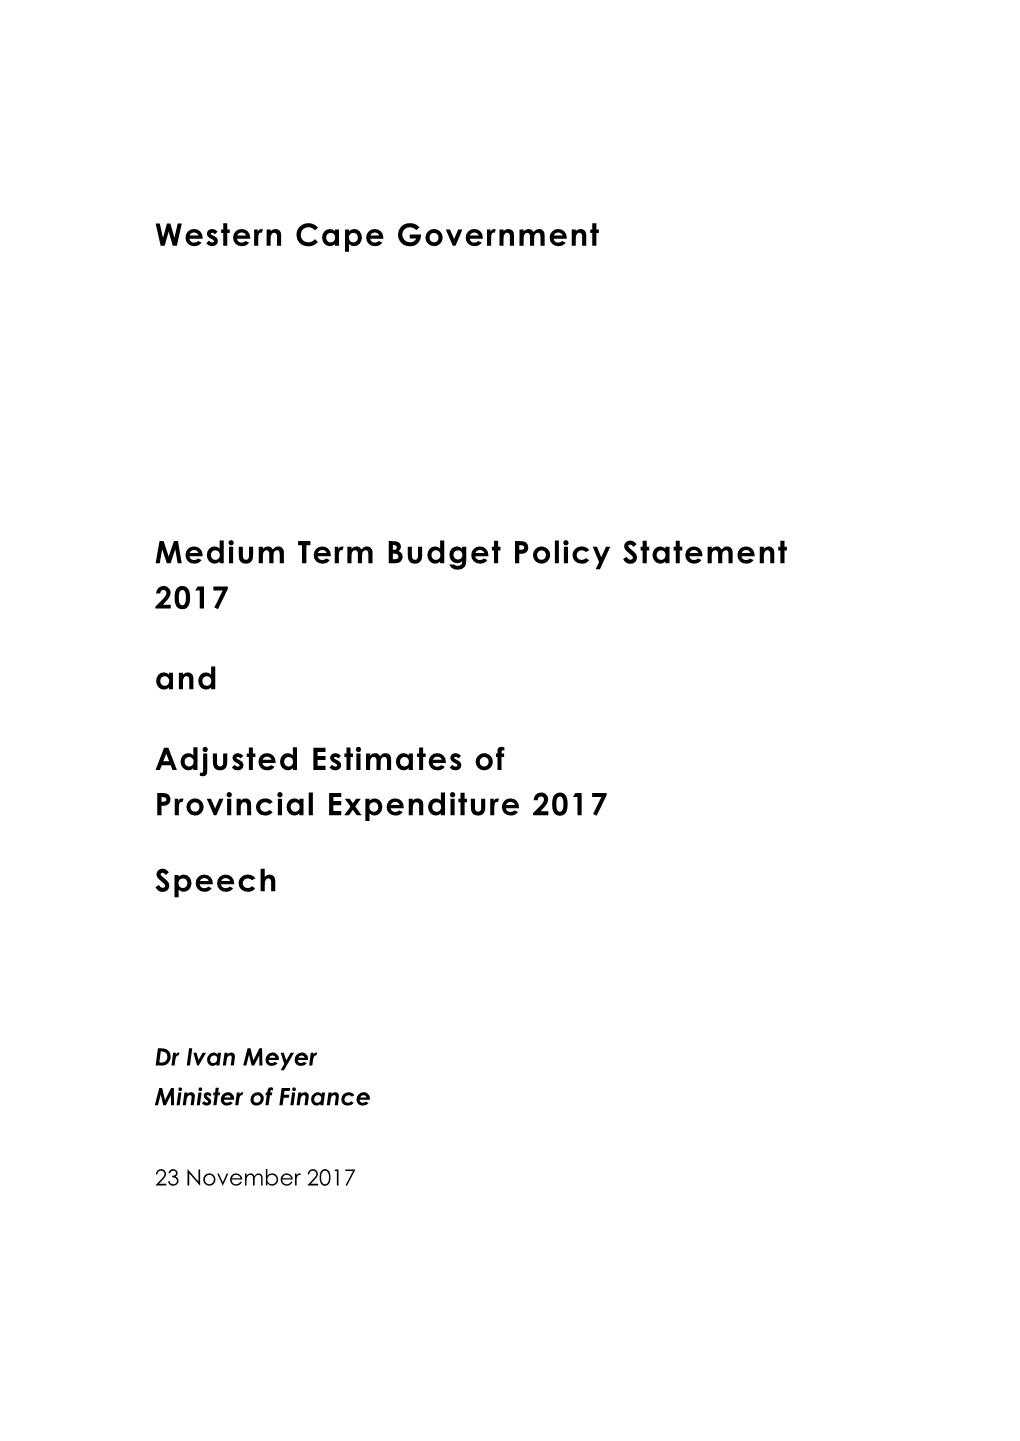 Western Cape Government Medium Term Budget Policy Statement 2017